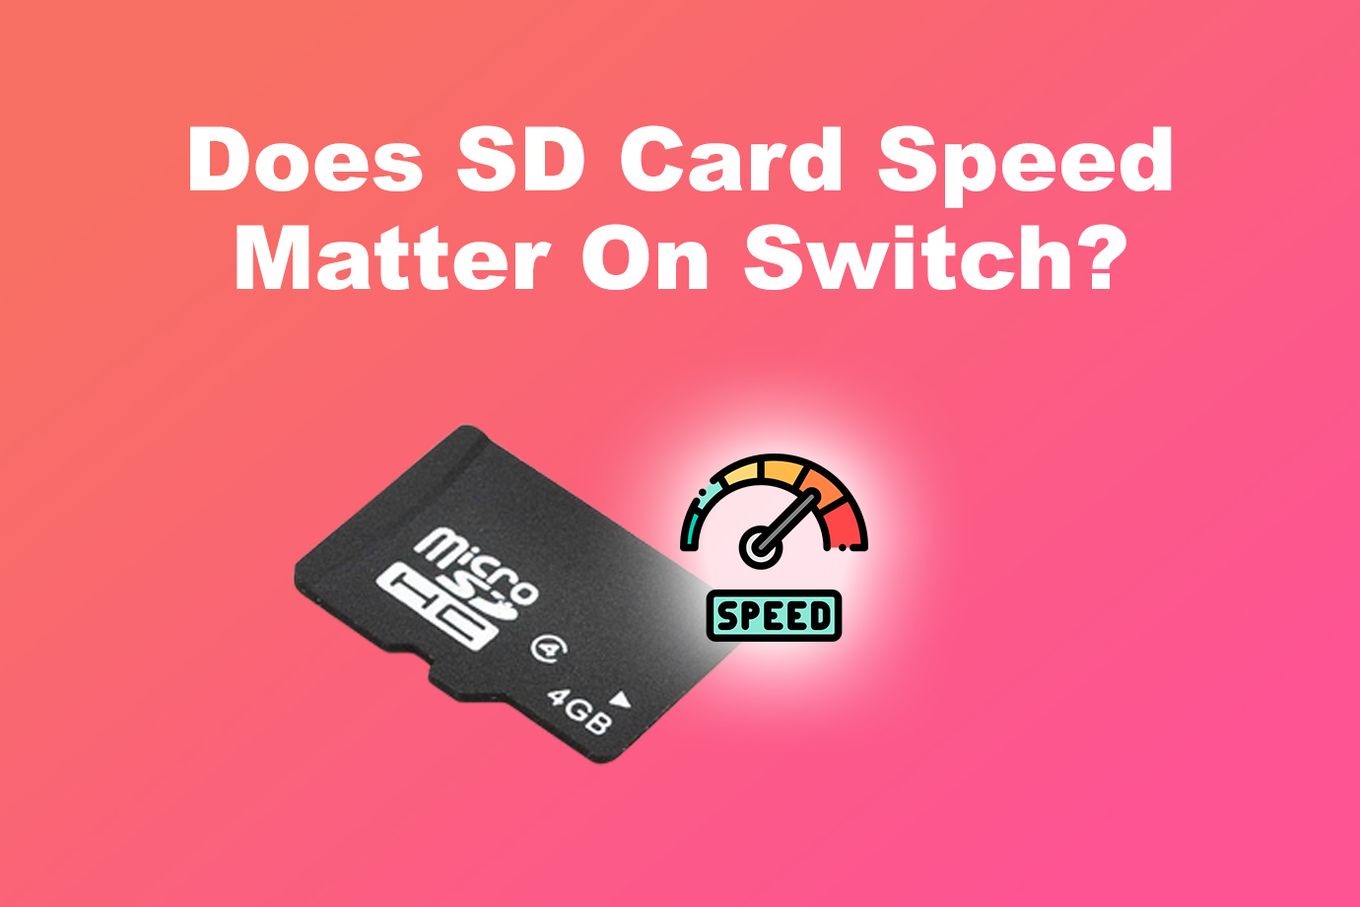 Does SD Card Speed Matter On Switch?